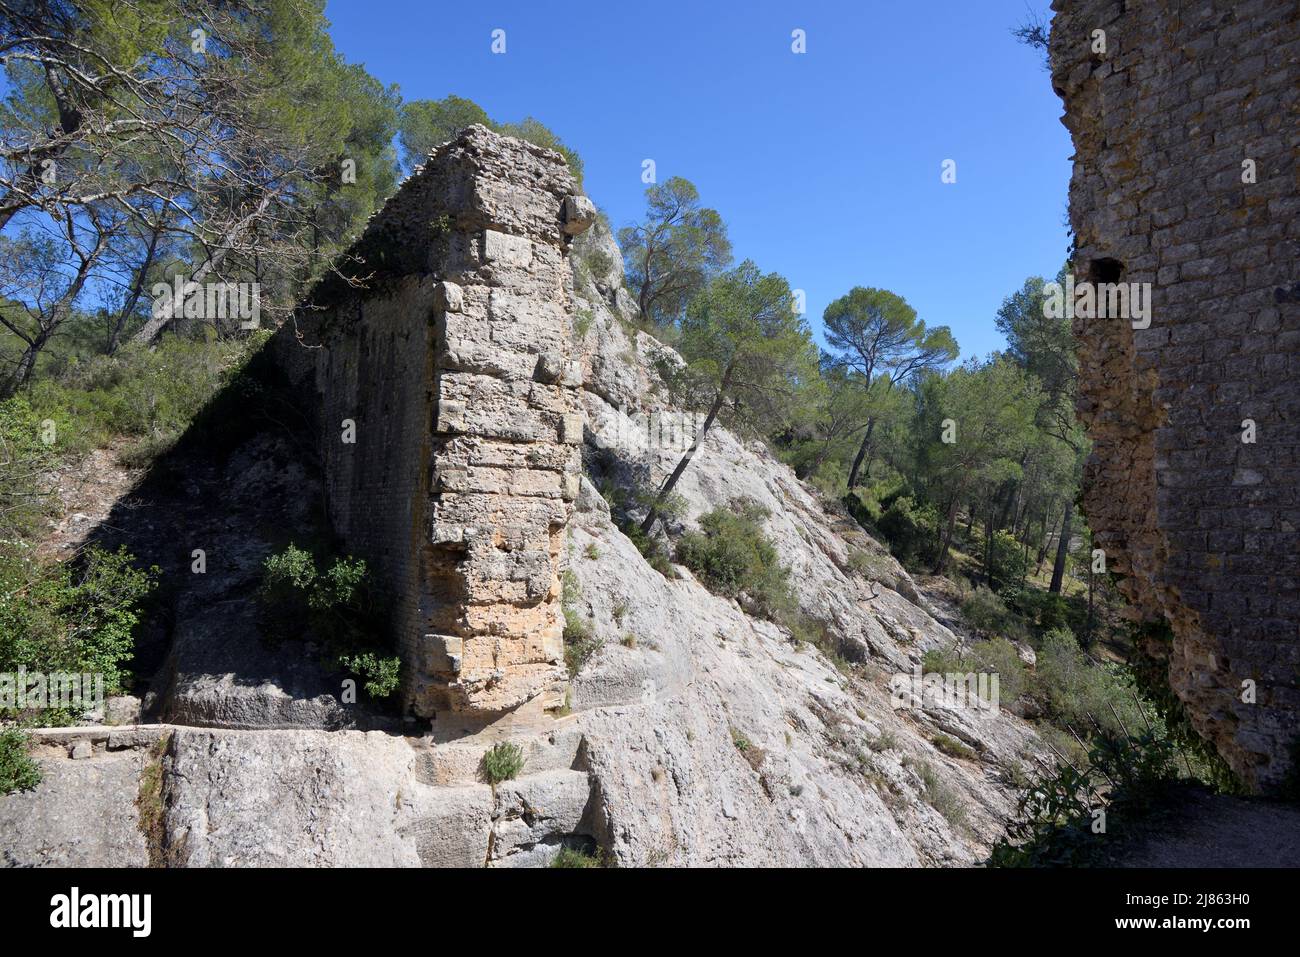 Remains of the Ruined Roman Aqueduct, Barrage or Dam, which brought water to Aquae Sextius in Roman times, at Le Tholonet Aix-en-Provence Provence Stock Photo